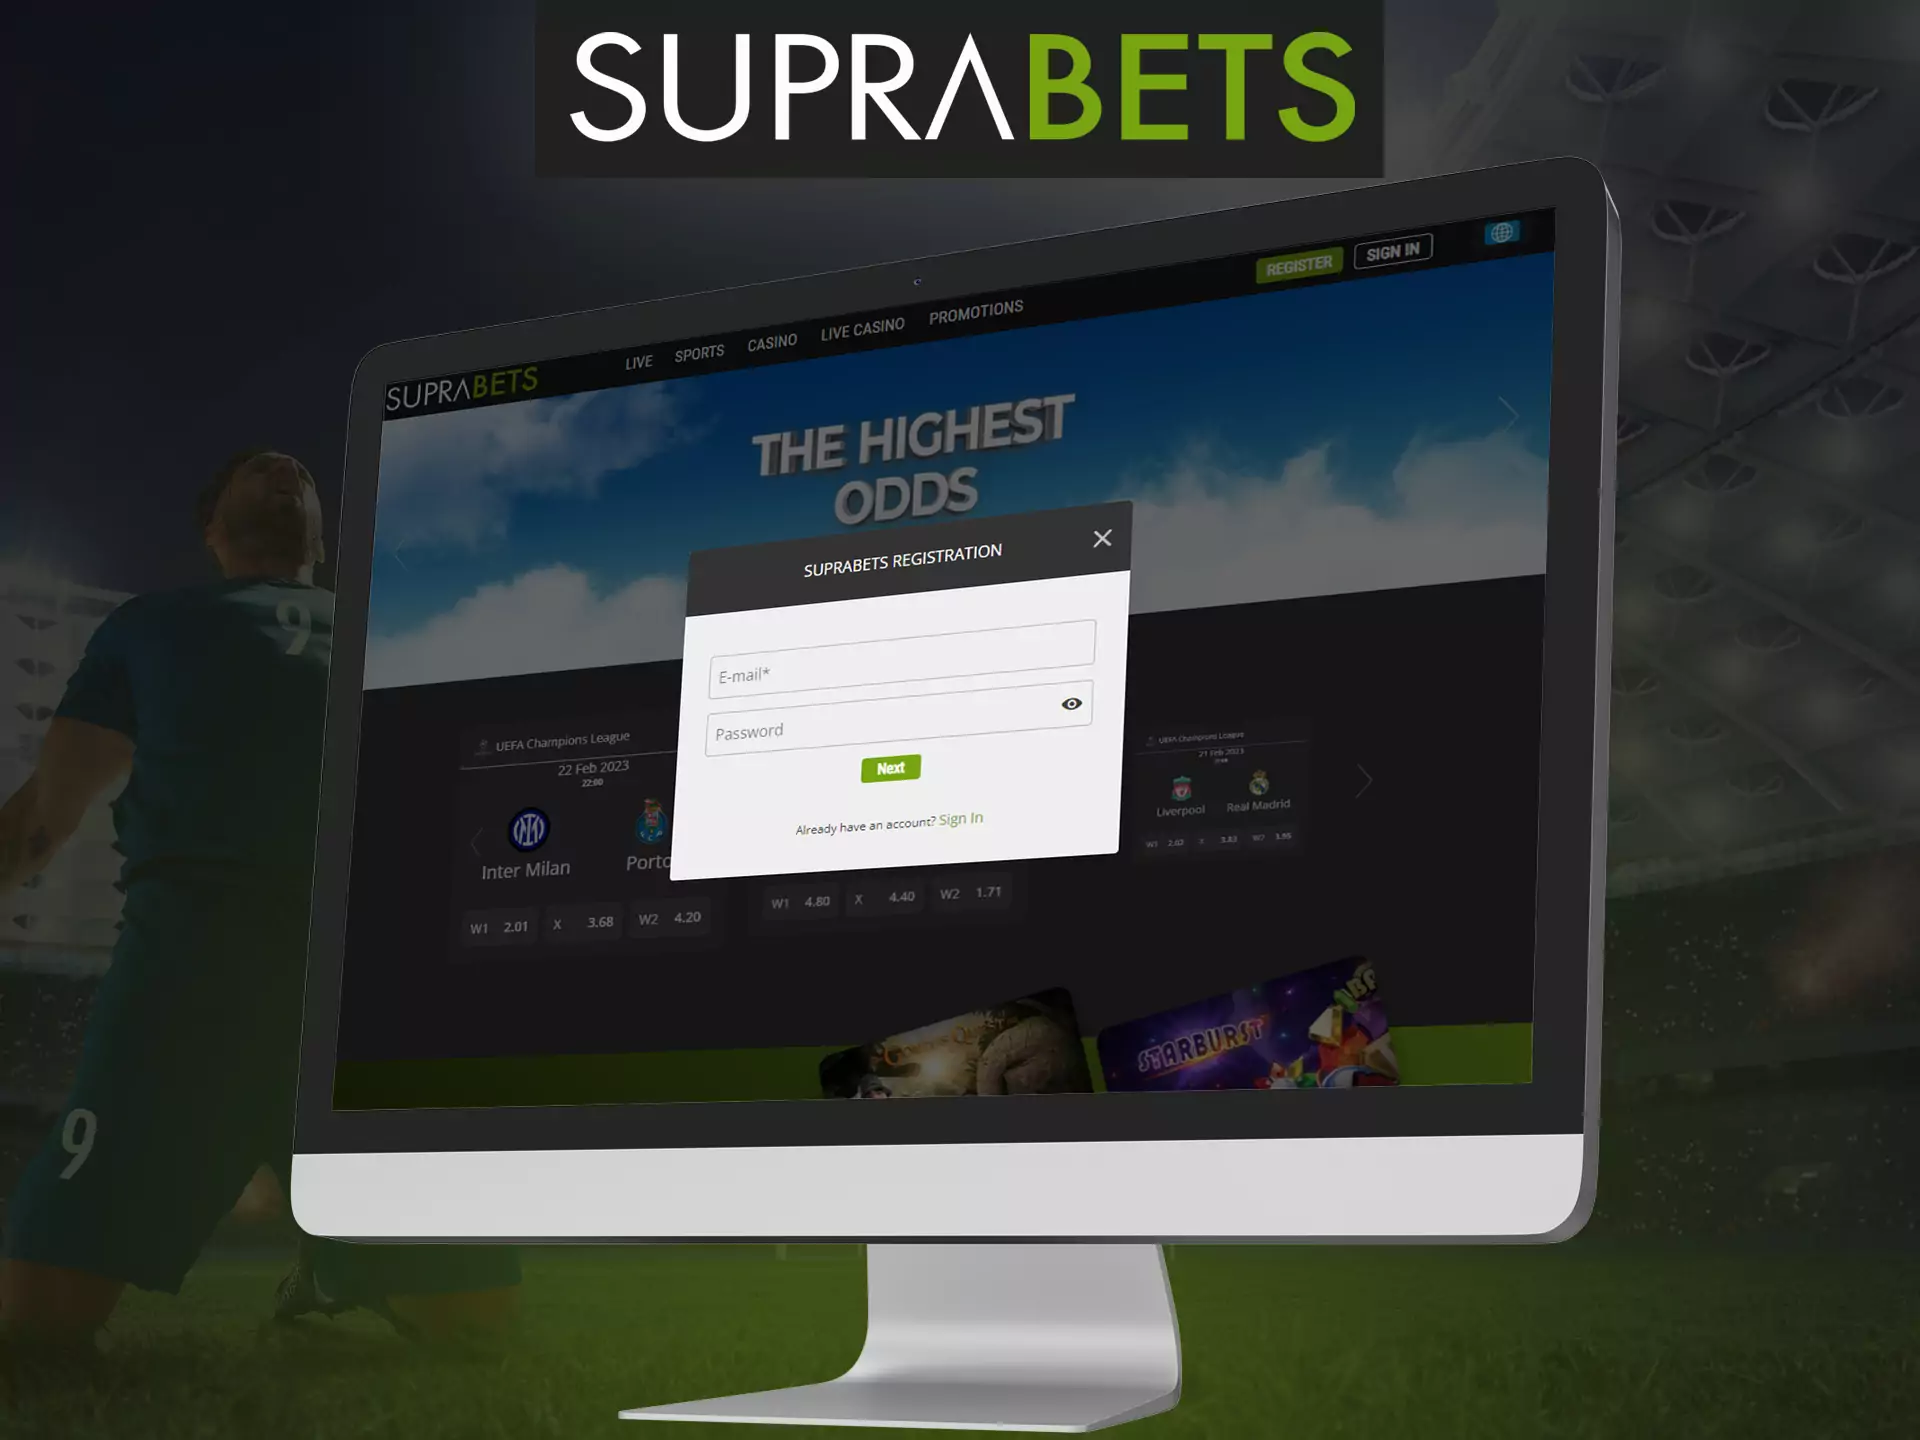 Go through a simple registration on Suprabets and use all the functions.